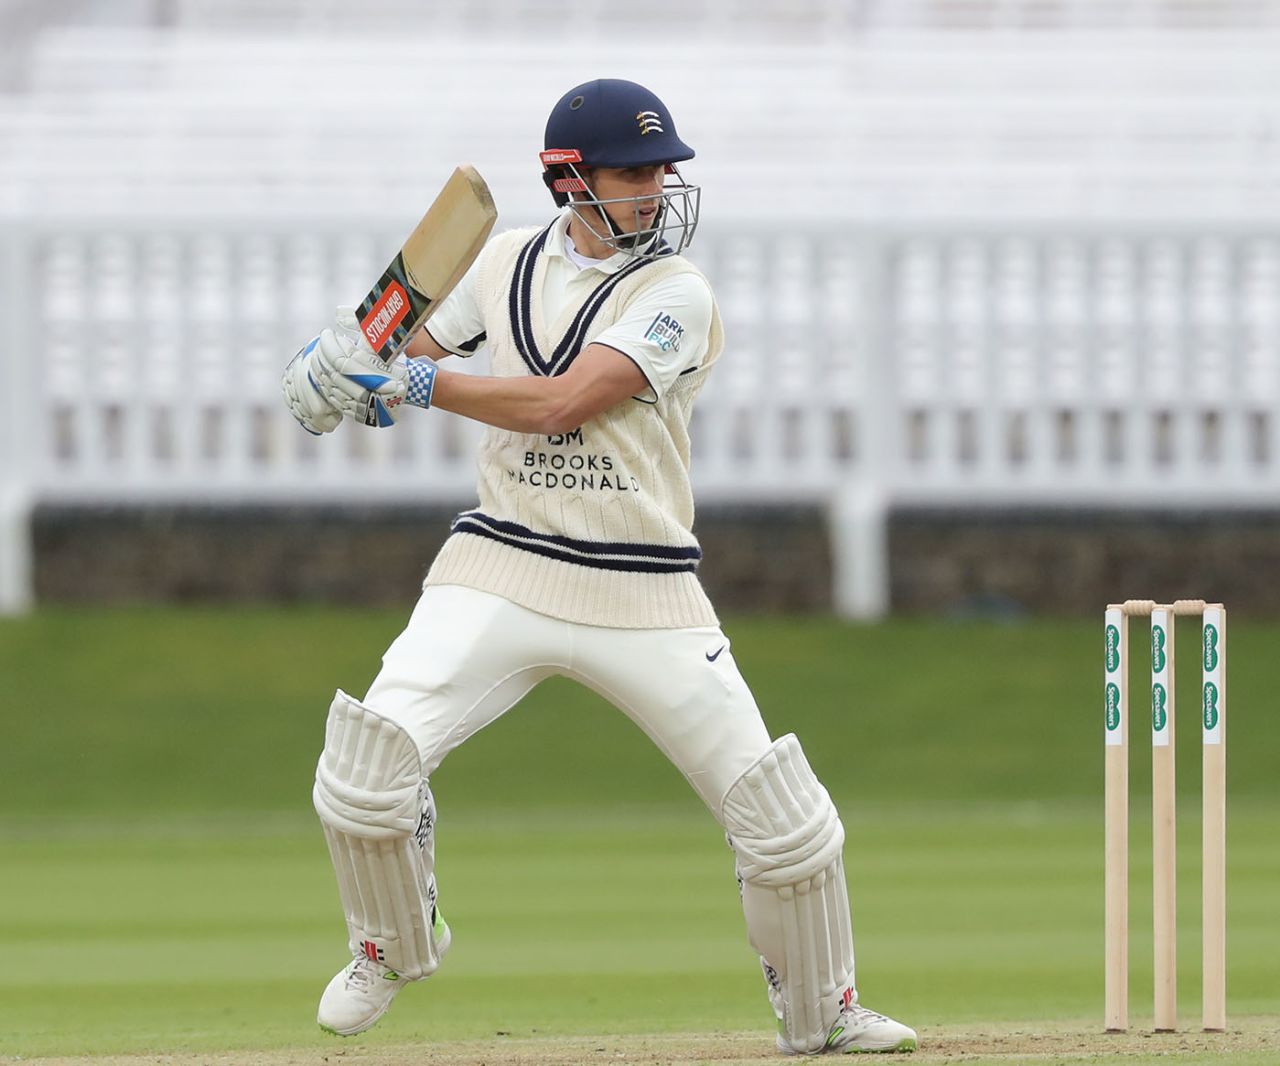 John Simpson plays a shot, Middlesex v Glamorgan, County Championship Division Two, Lord's, April 29, 2018